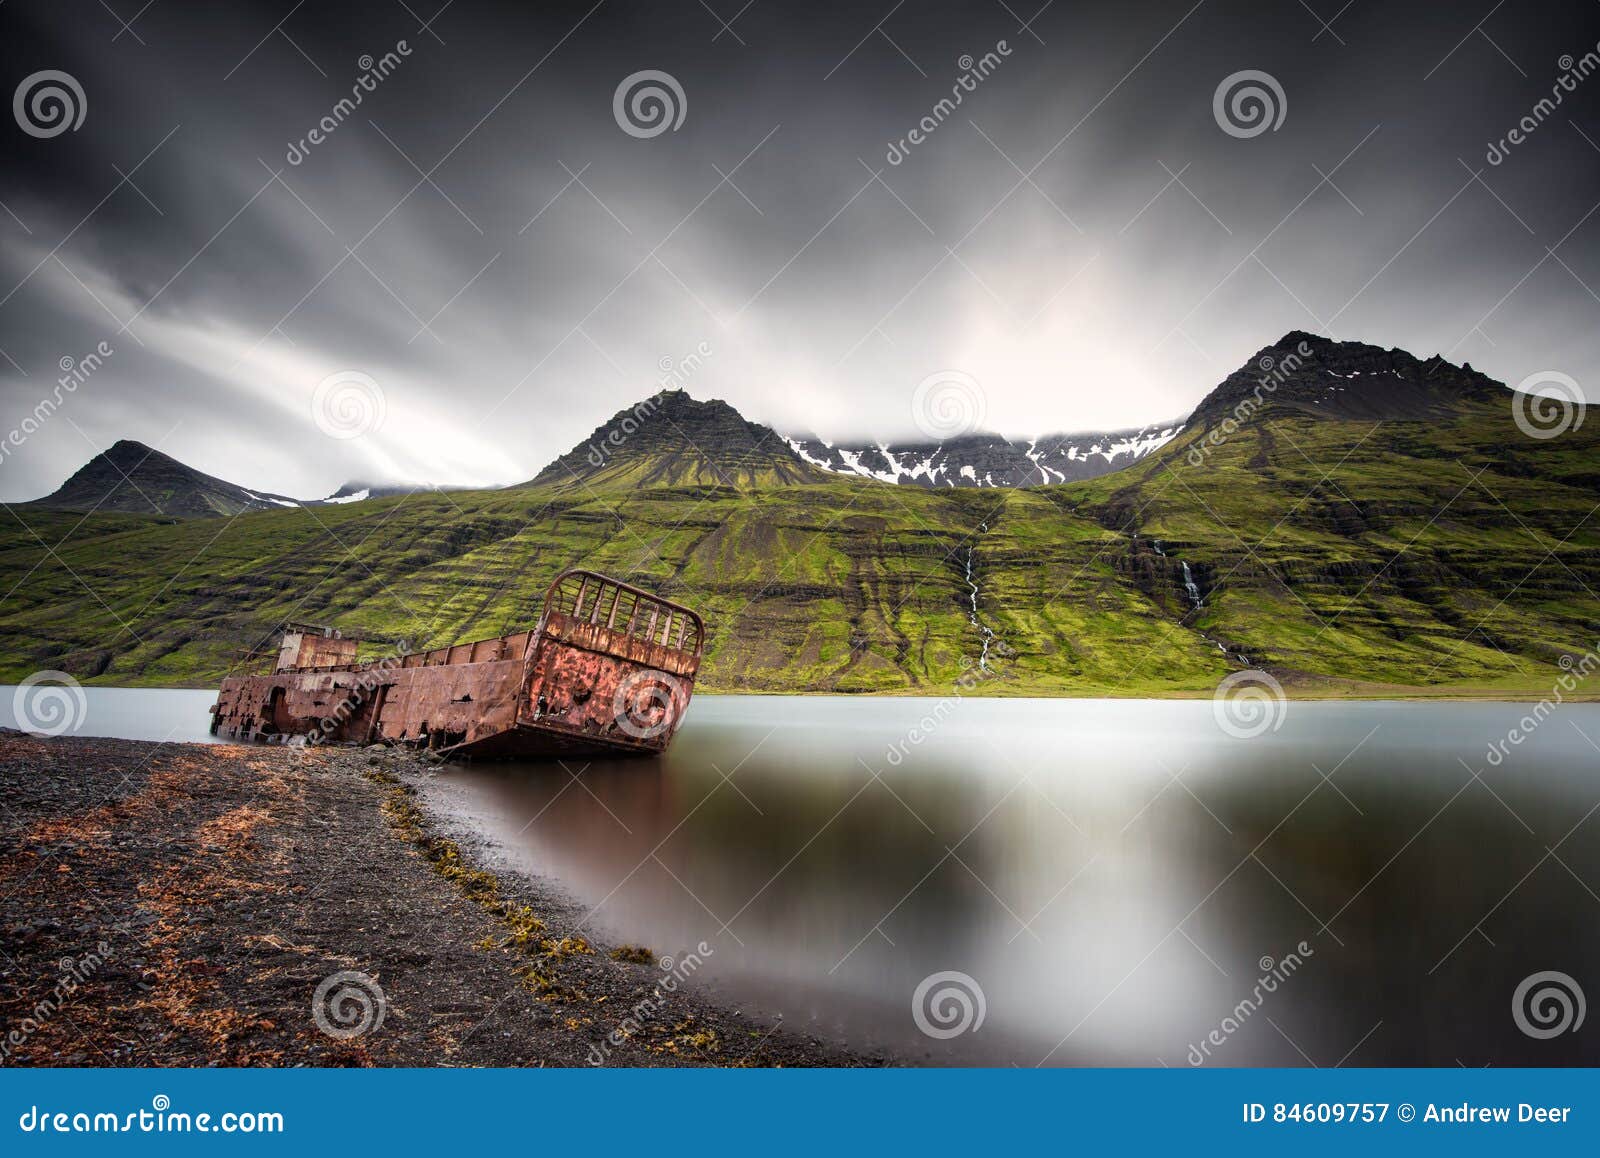 mjoifjordur, iceland - abandoned fishing boat rusts in fjord